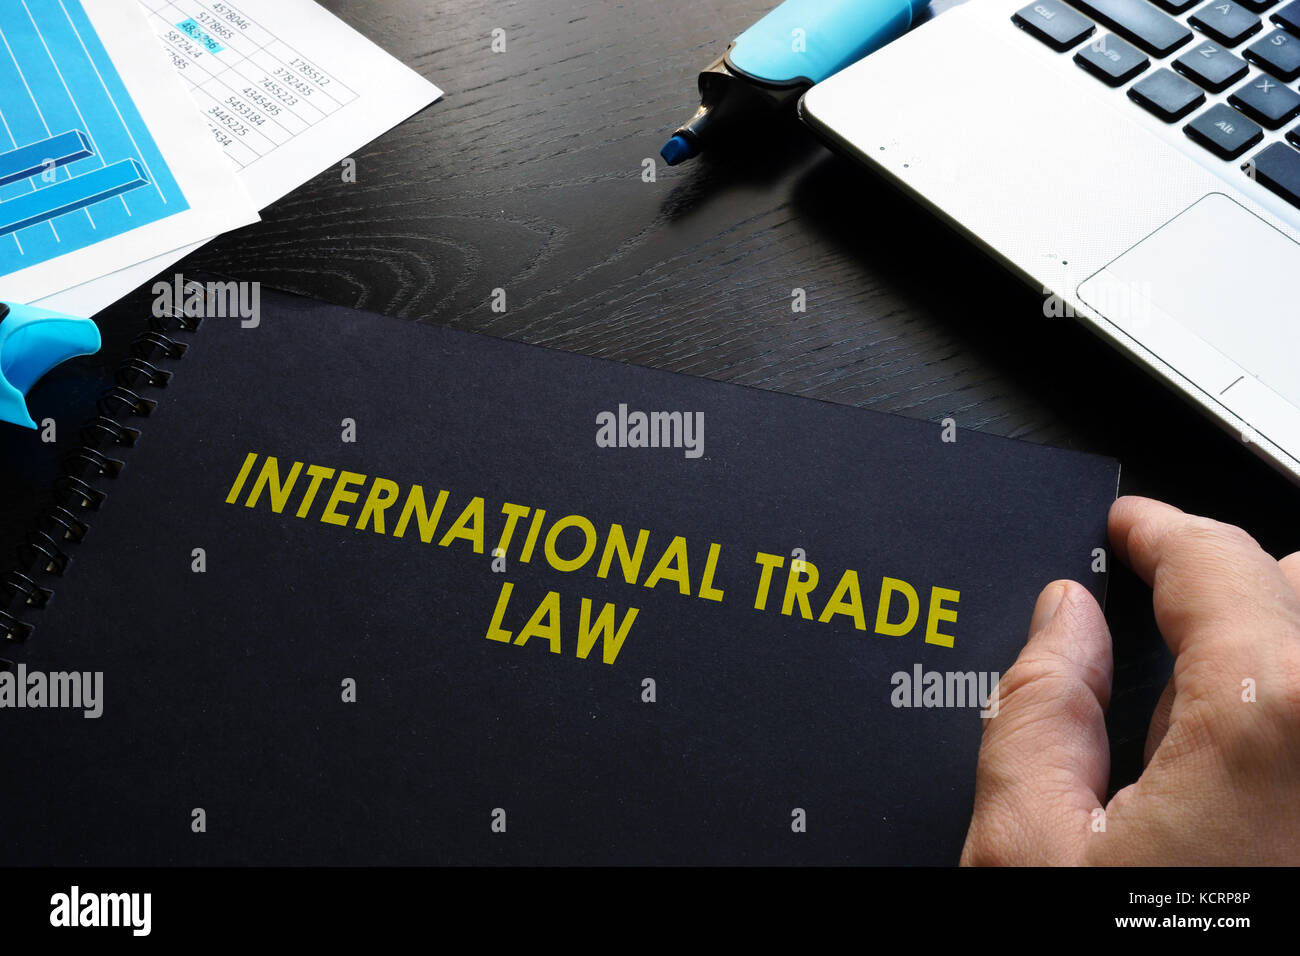 International trade law and notebook on a table. Stock Photo